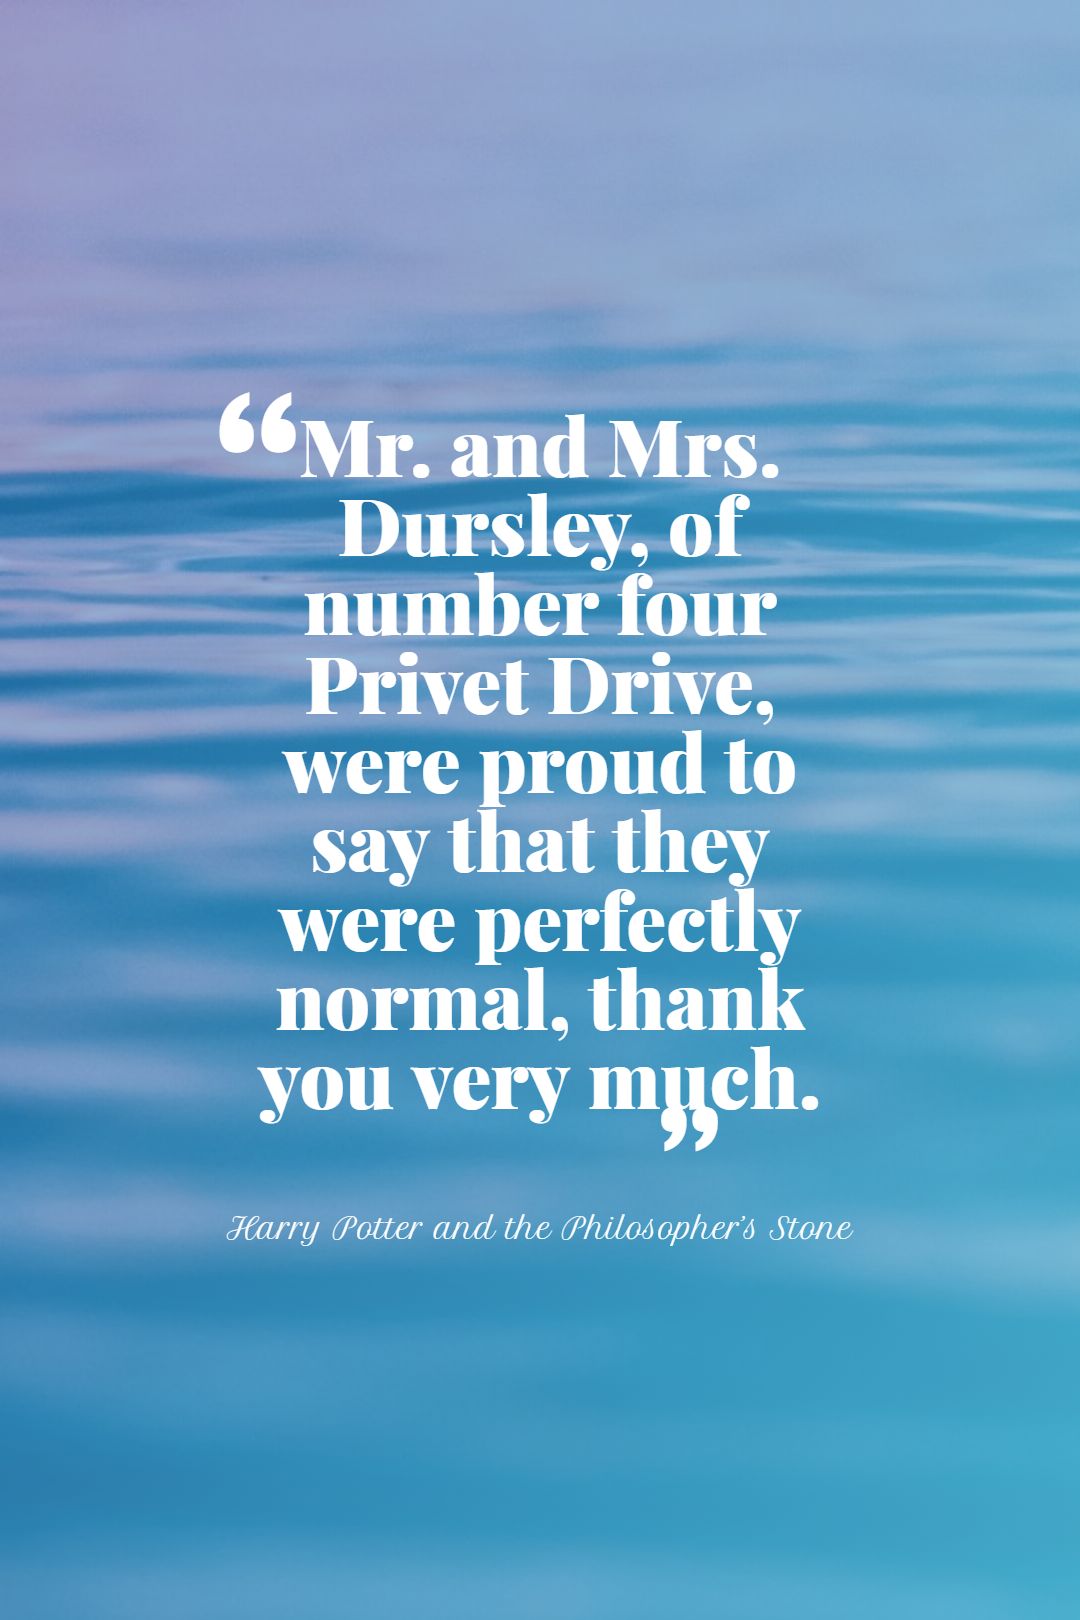 Mr. and Mrs. Dursley of number four Privet Drive were proud to say that they were perfectly normal thank you very much.